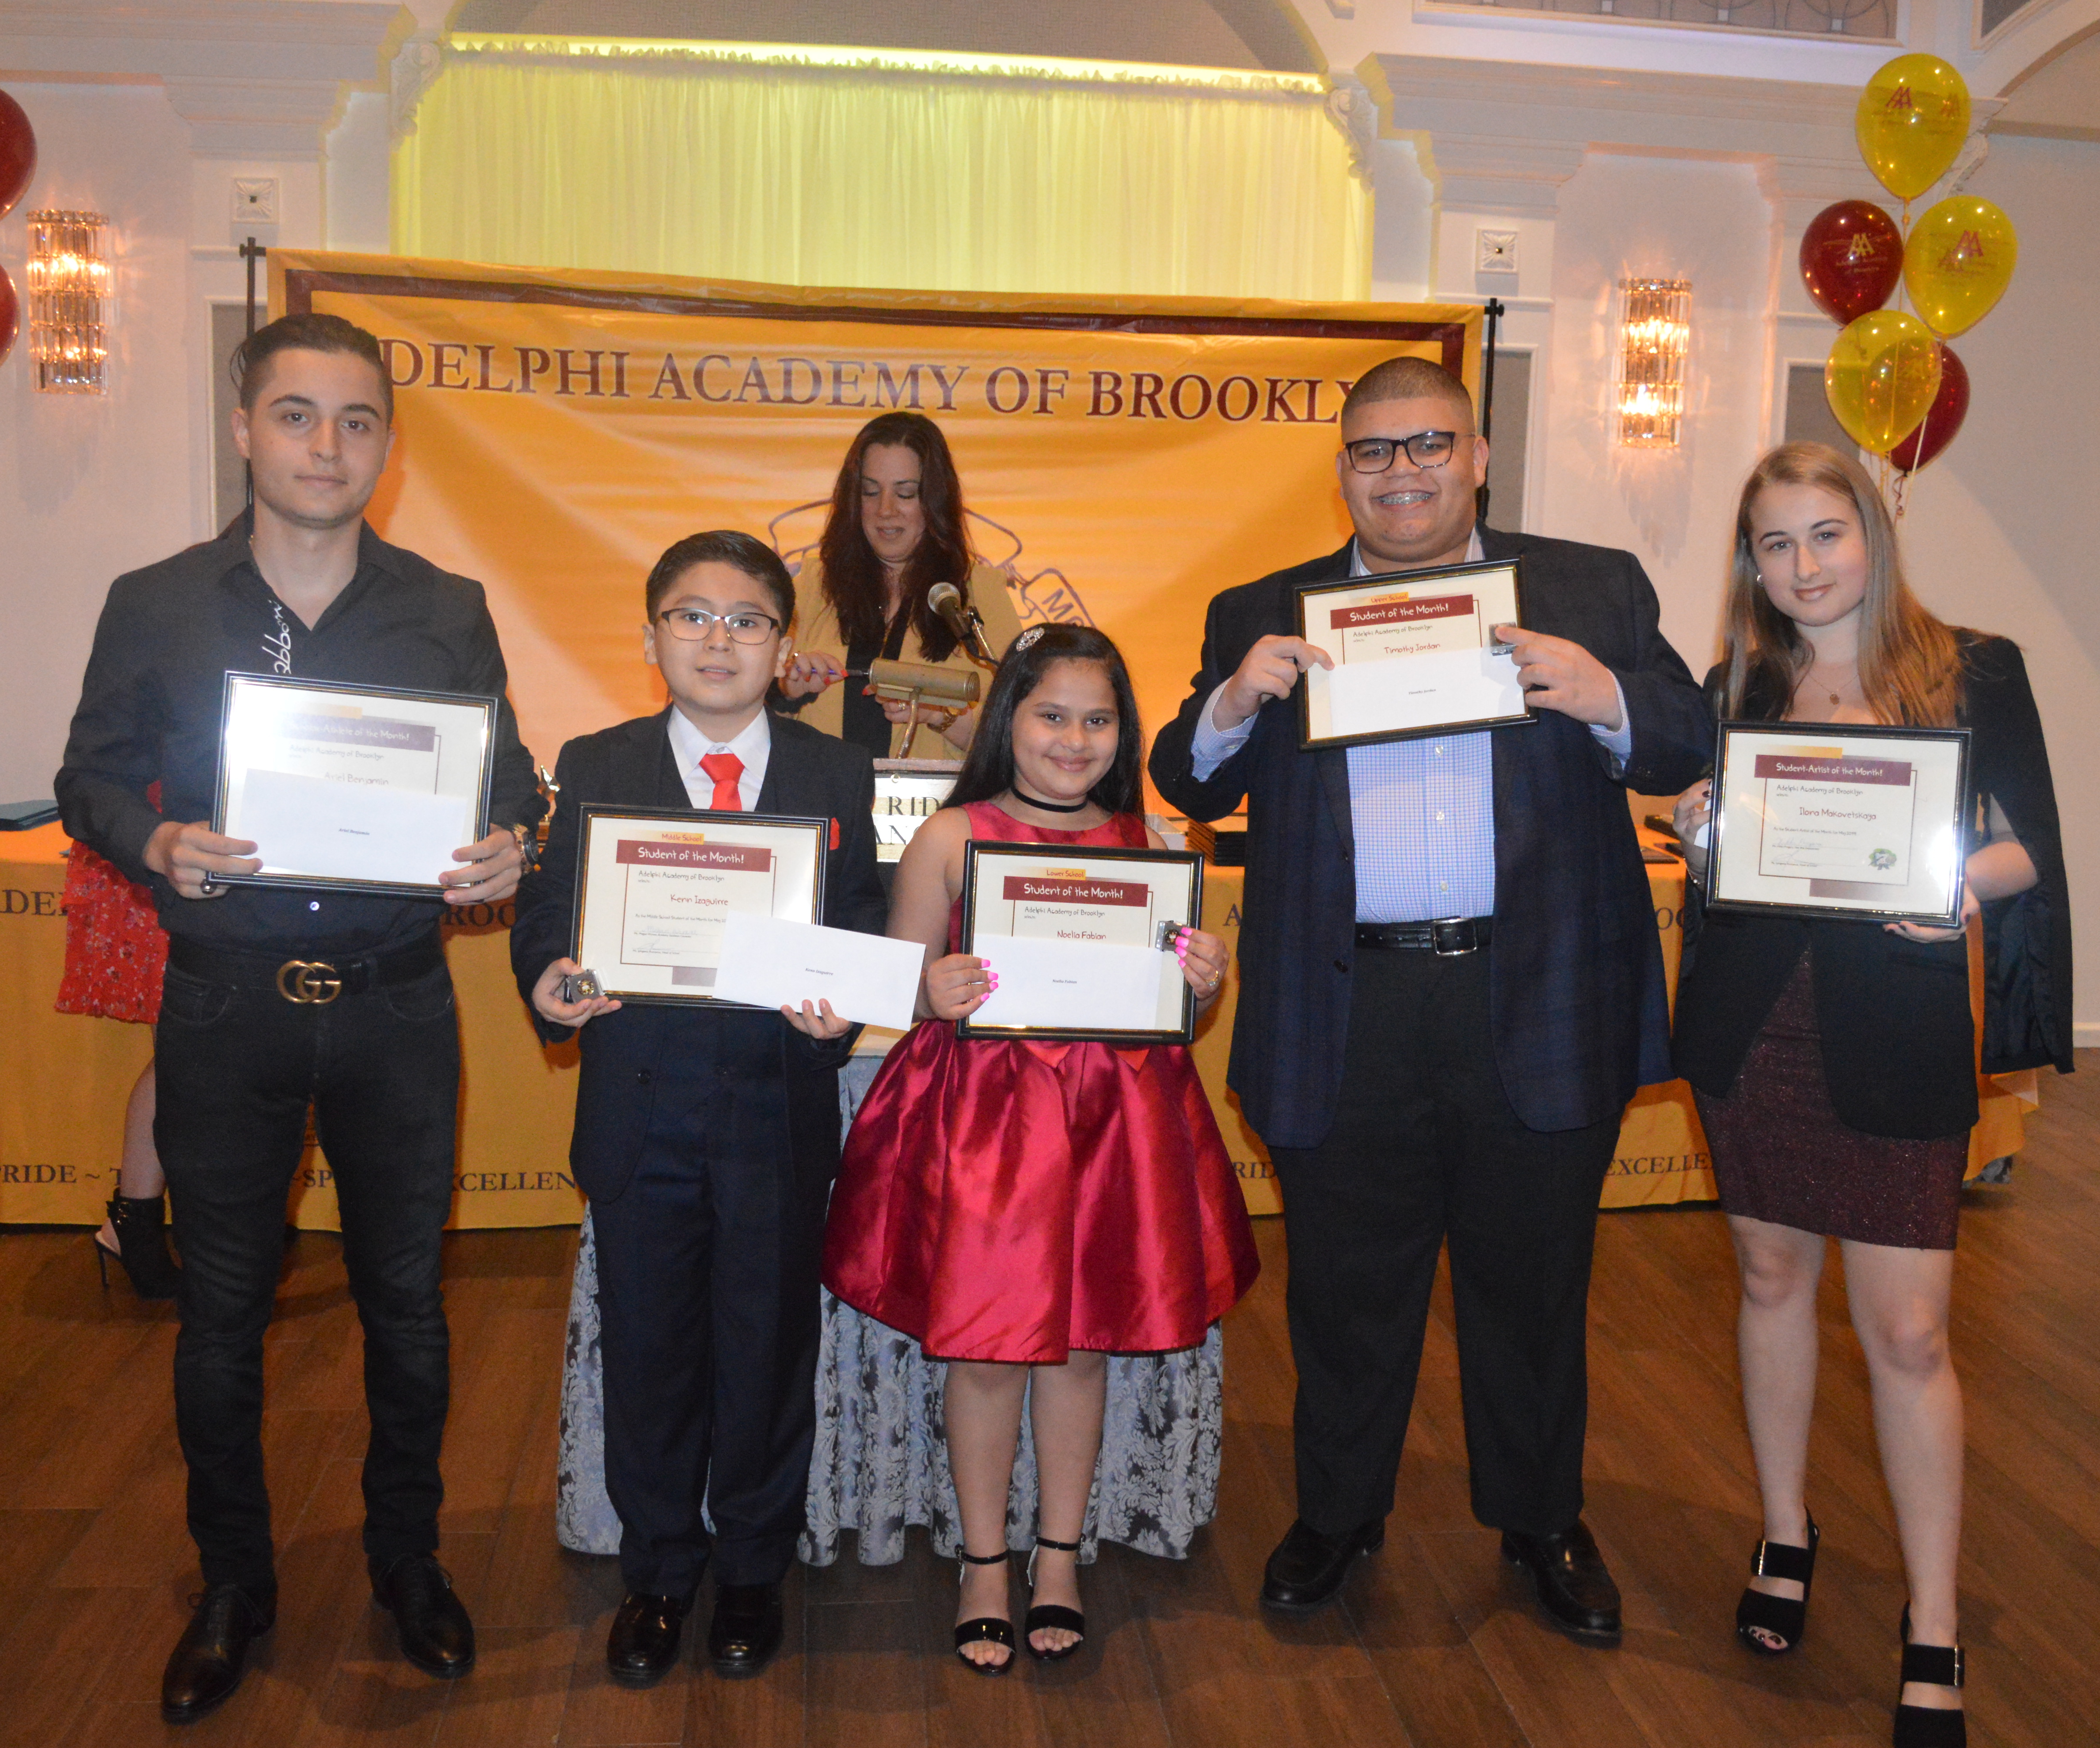 Congratulations to Adelphi Academy of Brooklyn's May Students of the Month!